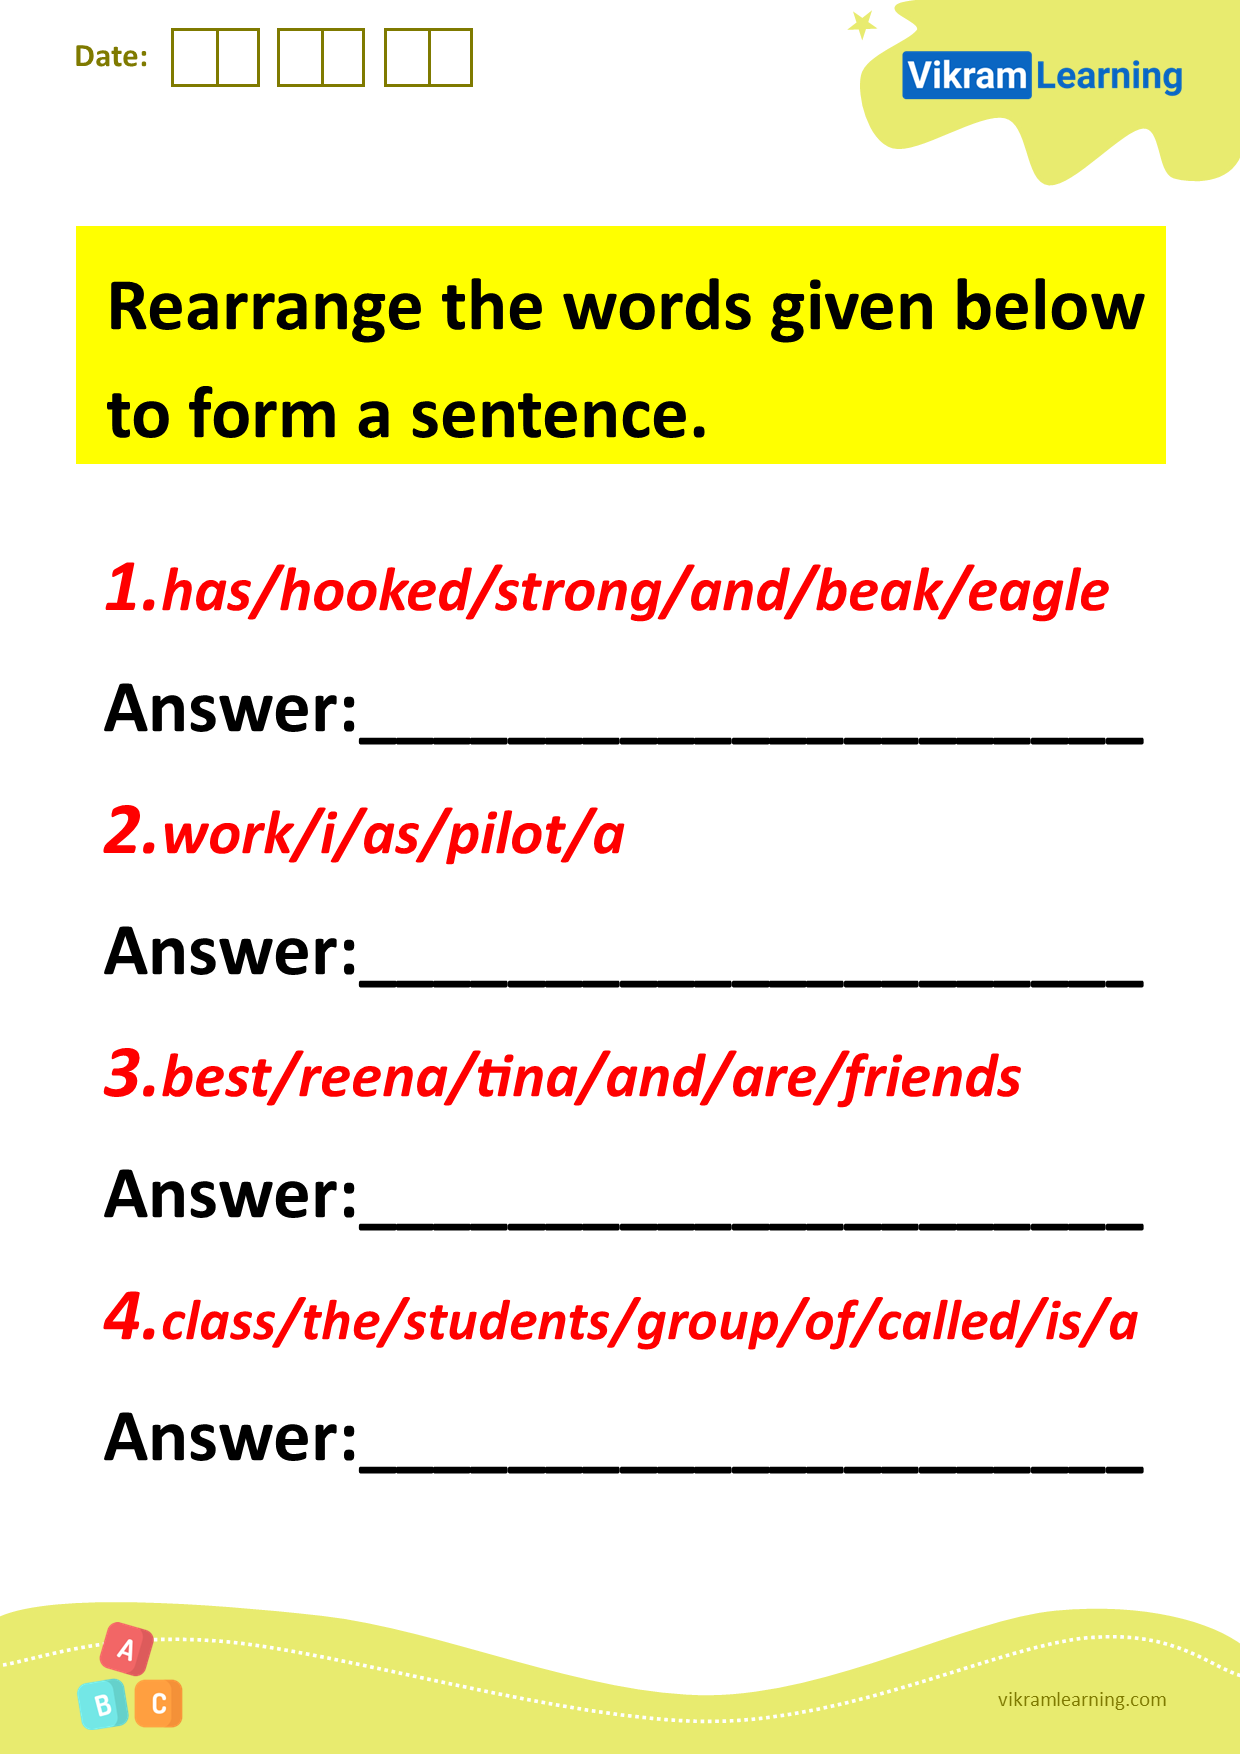 download-rearrange-the-words-given-below-to-form-a-sentence-worksheets-vikramlearning